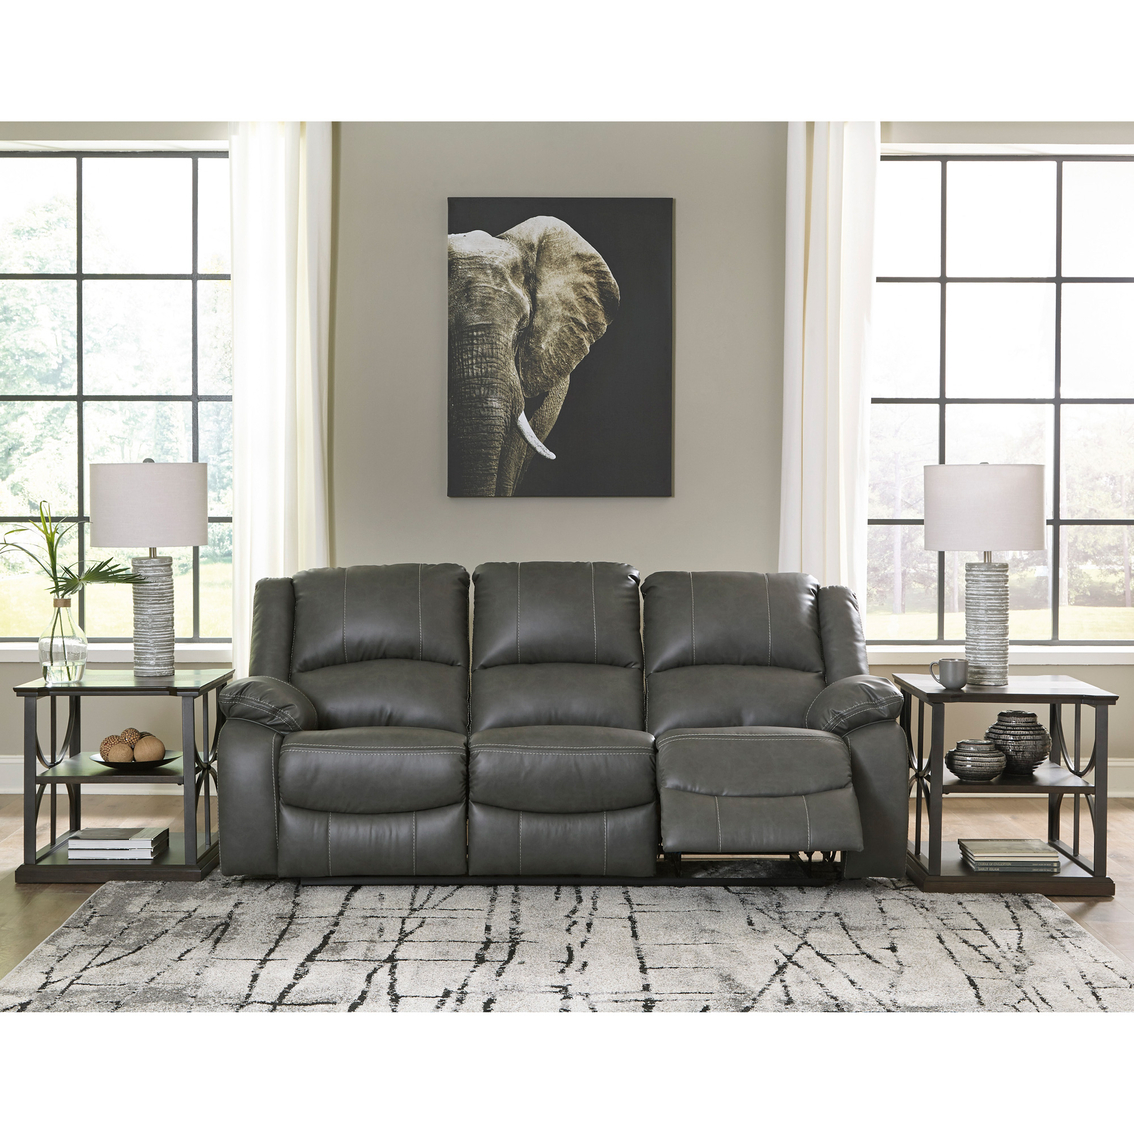 Signature Design by Ashley Caldwell Power Reclining 2 pc. Set - Image 3 of 5